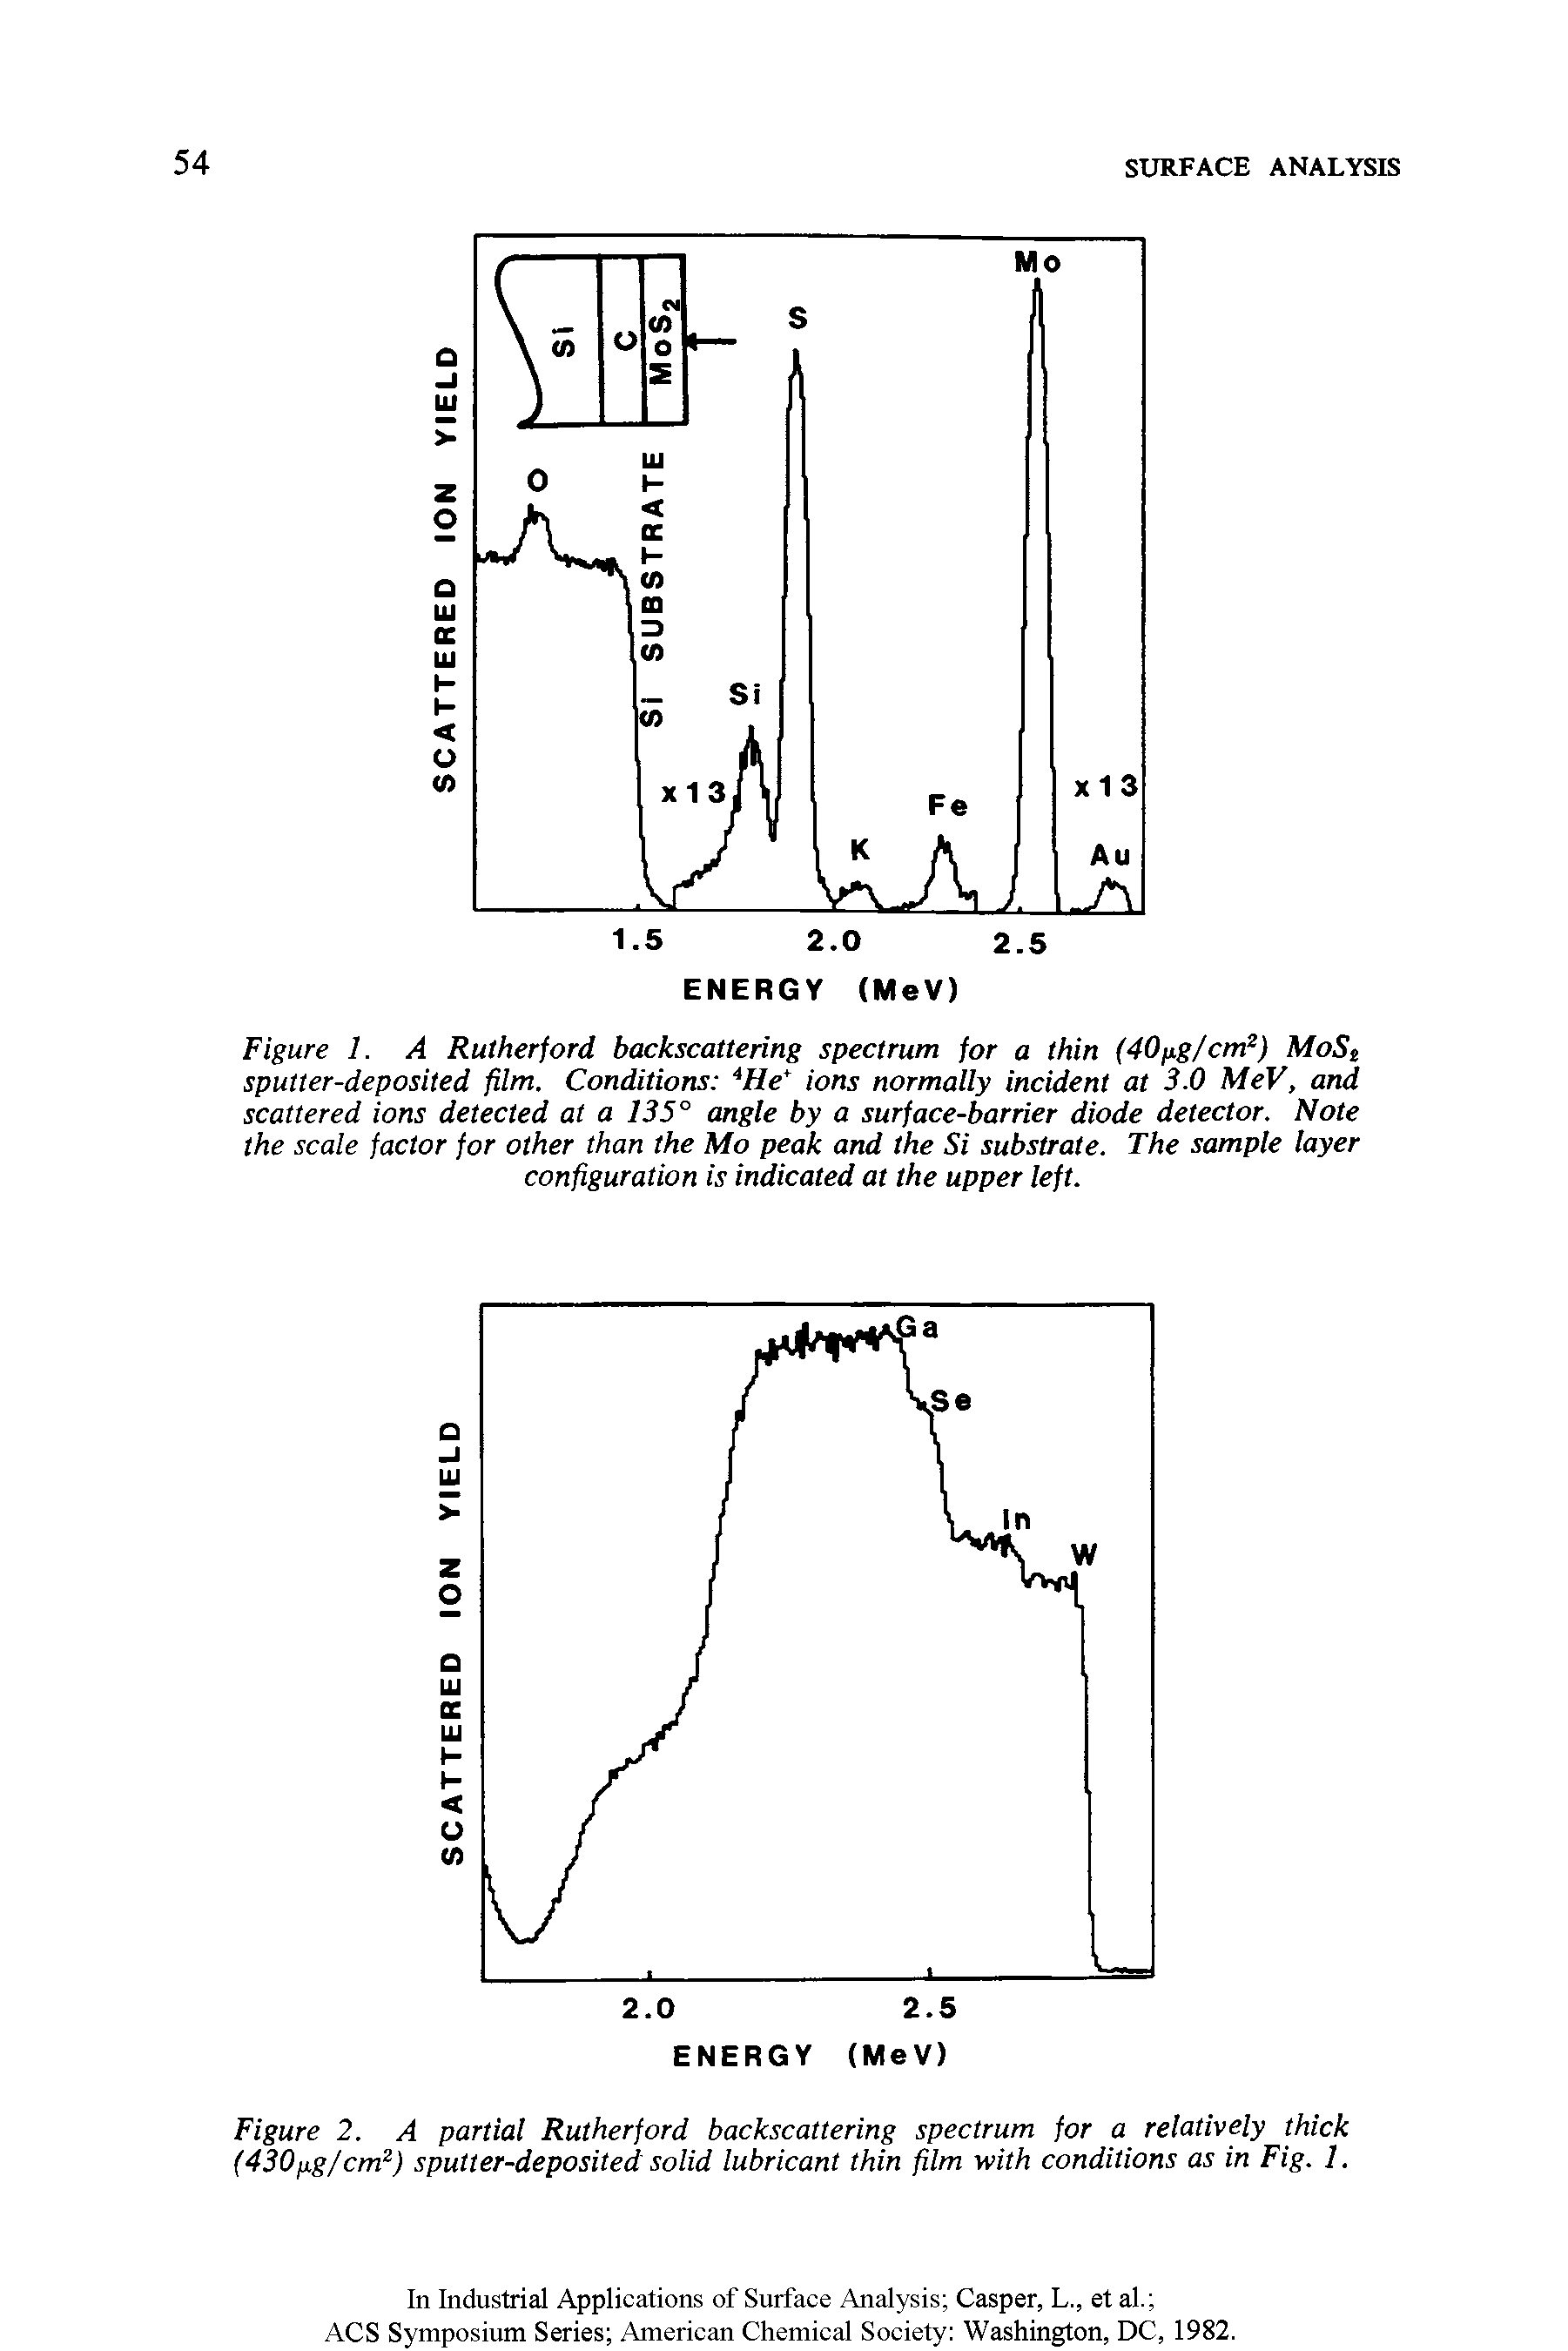 Figure 2. A partial Rutherford backscattering spectrum for a relatively thick (430jxg/cm2) sputter-deposited solid lubricant thin film with conditions as in Fig. 1.